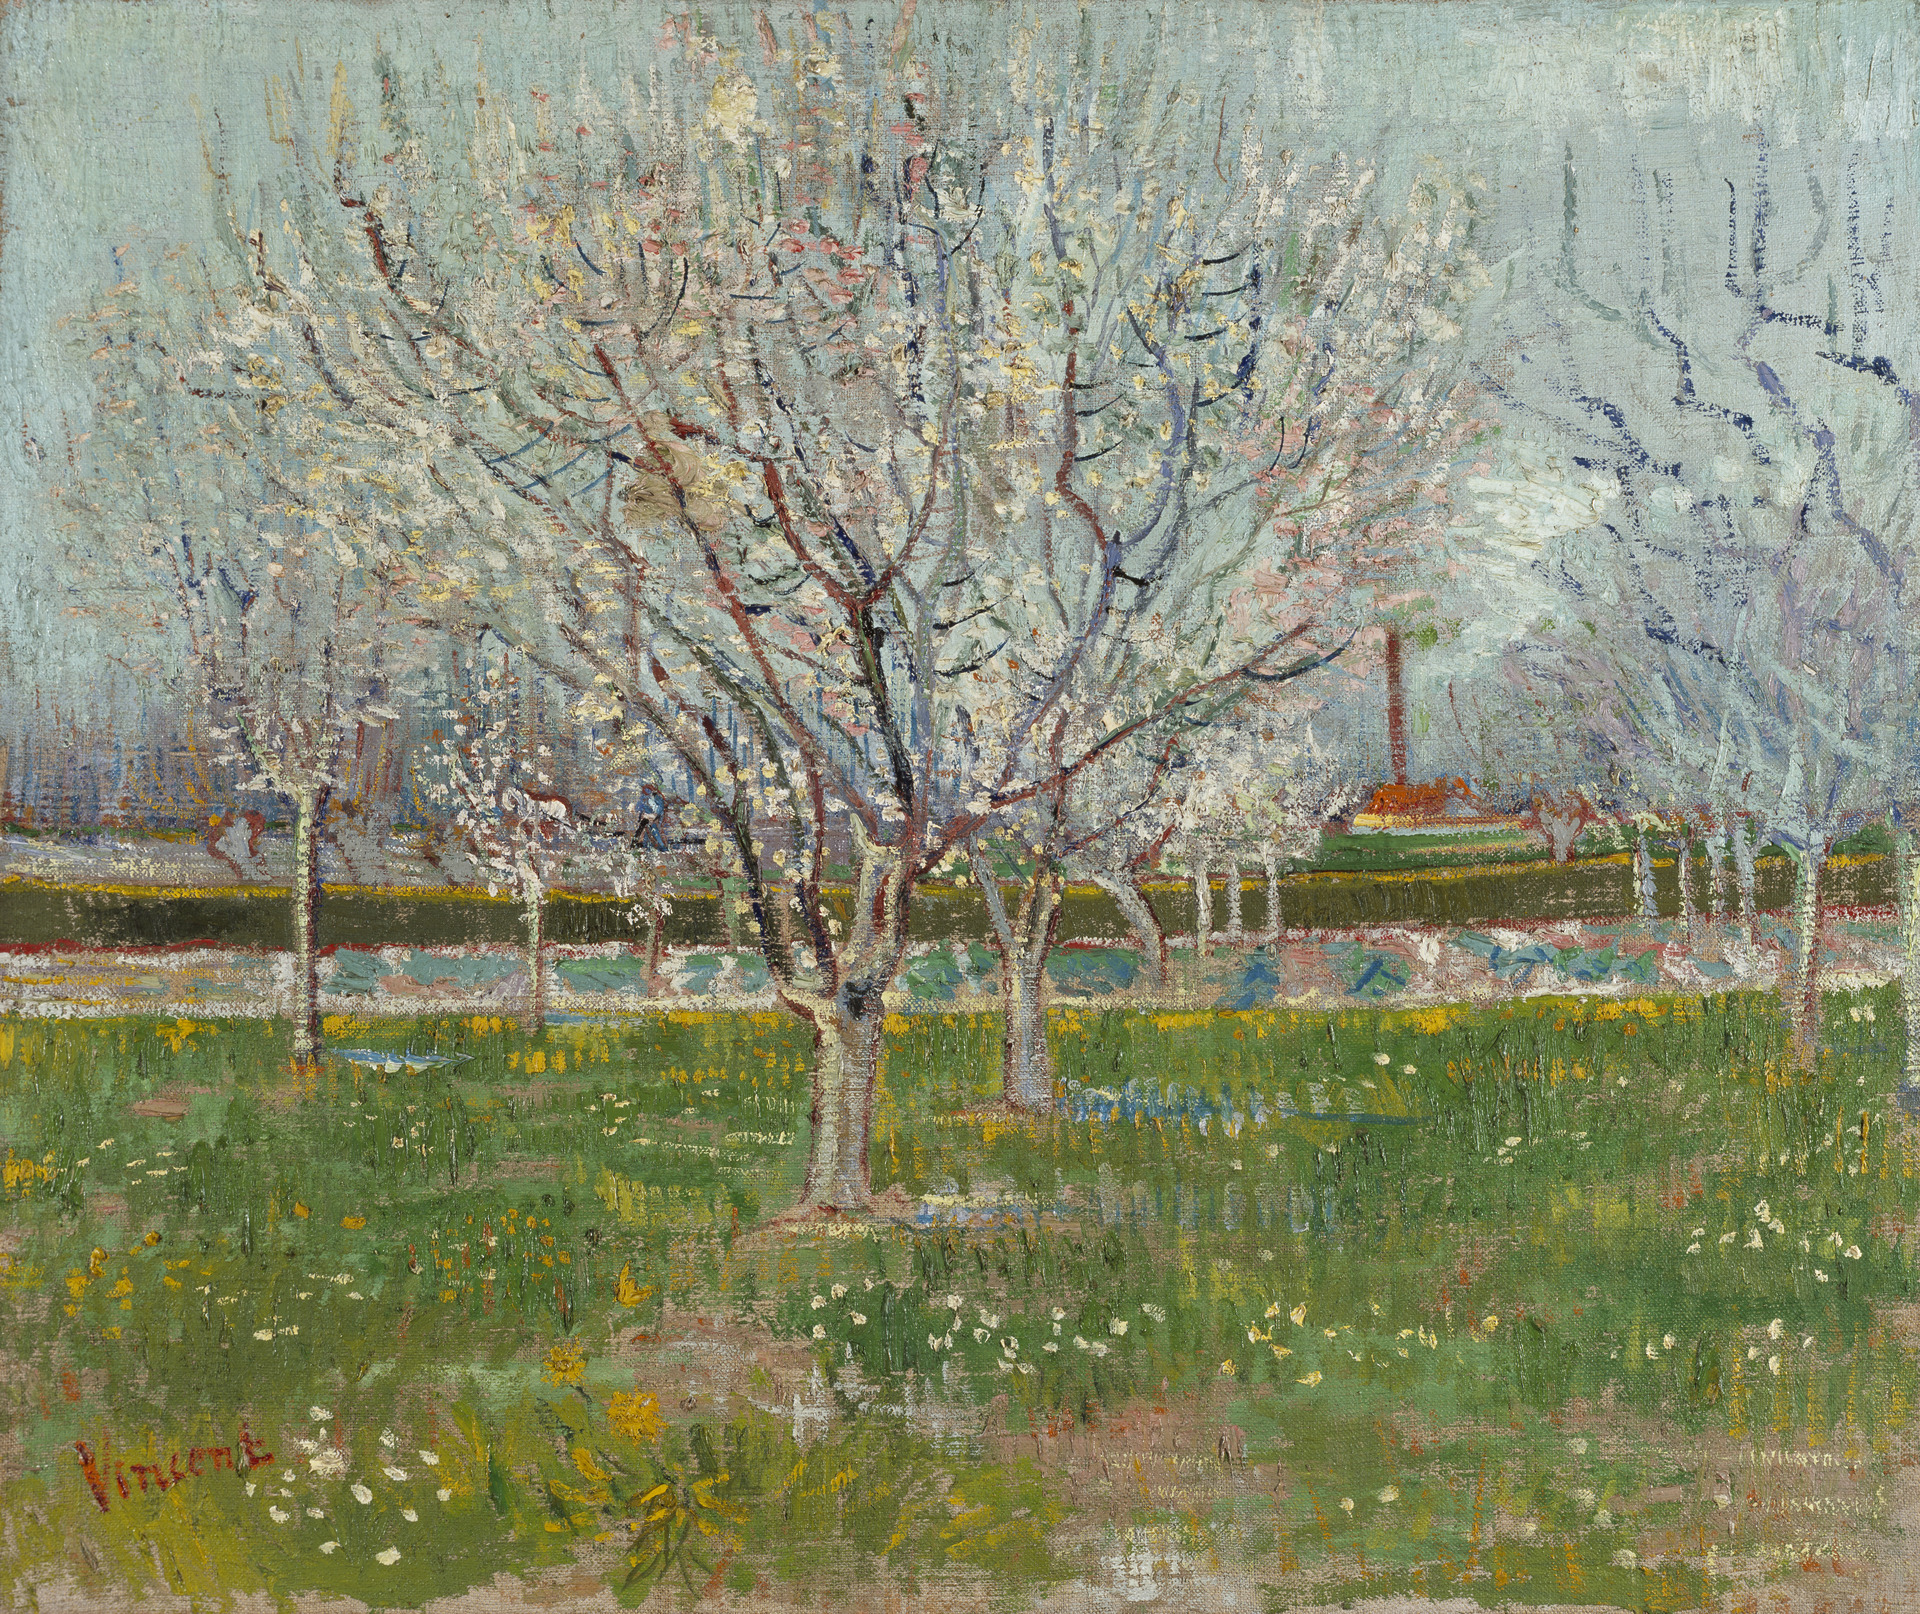 Orchard in Blossom (Plum Trees) by Vincent van Gogh - 1888 - 54.00 x 65.20 cm National Galleries of Scotland